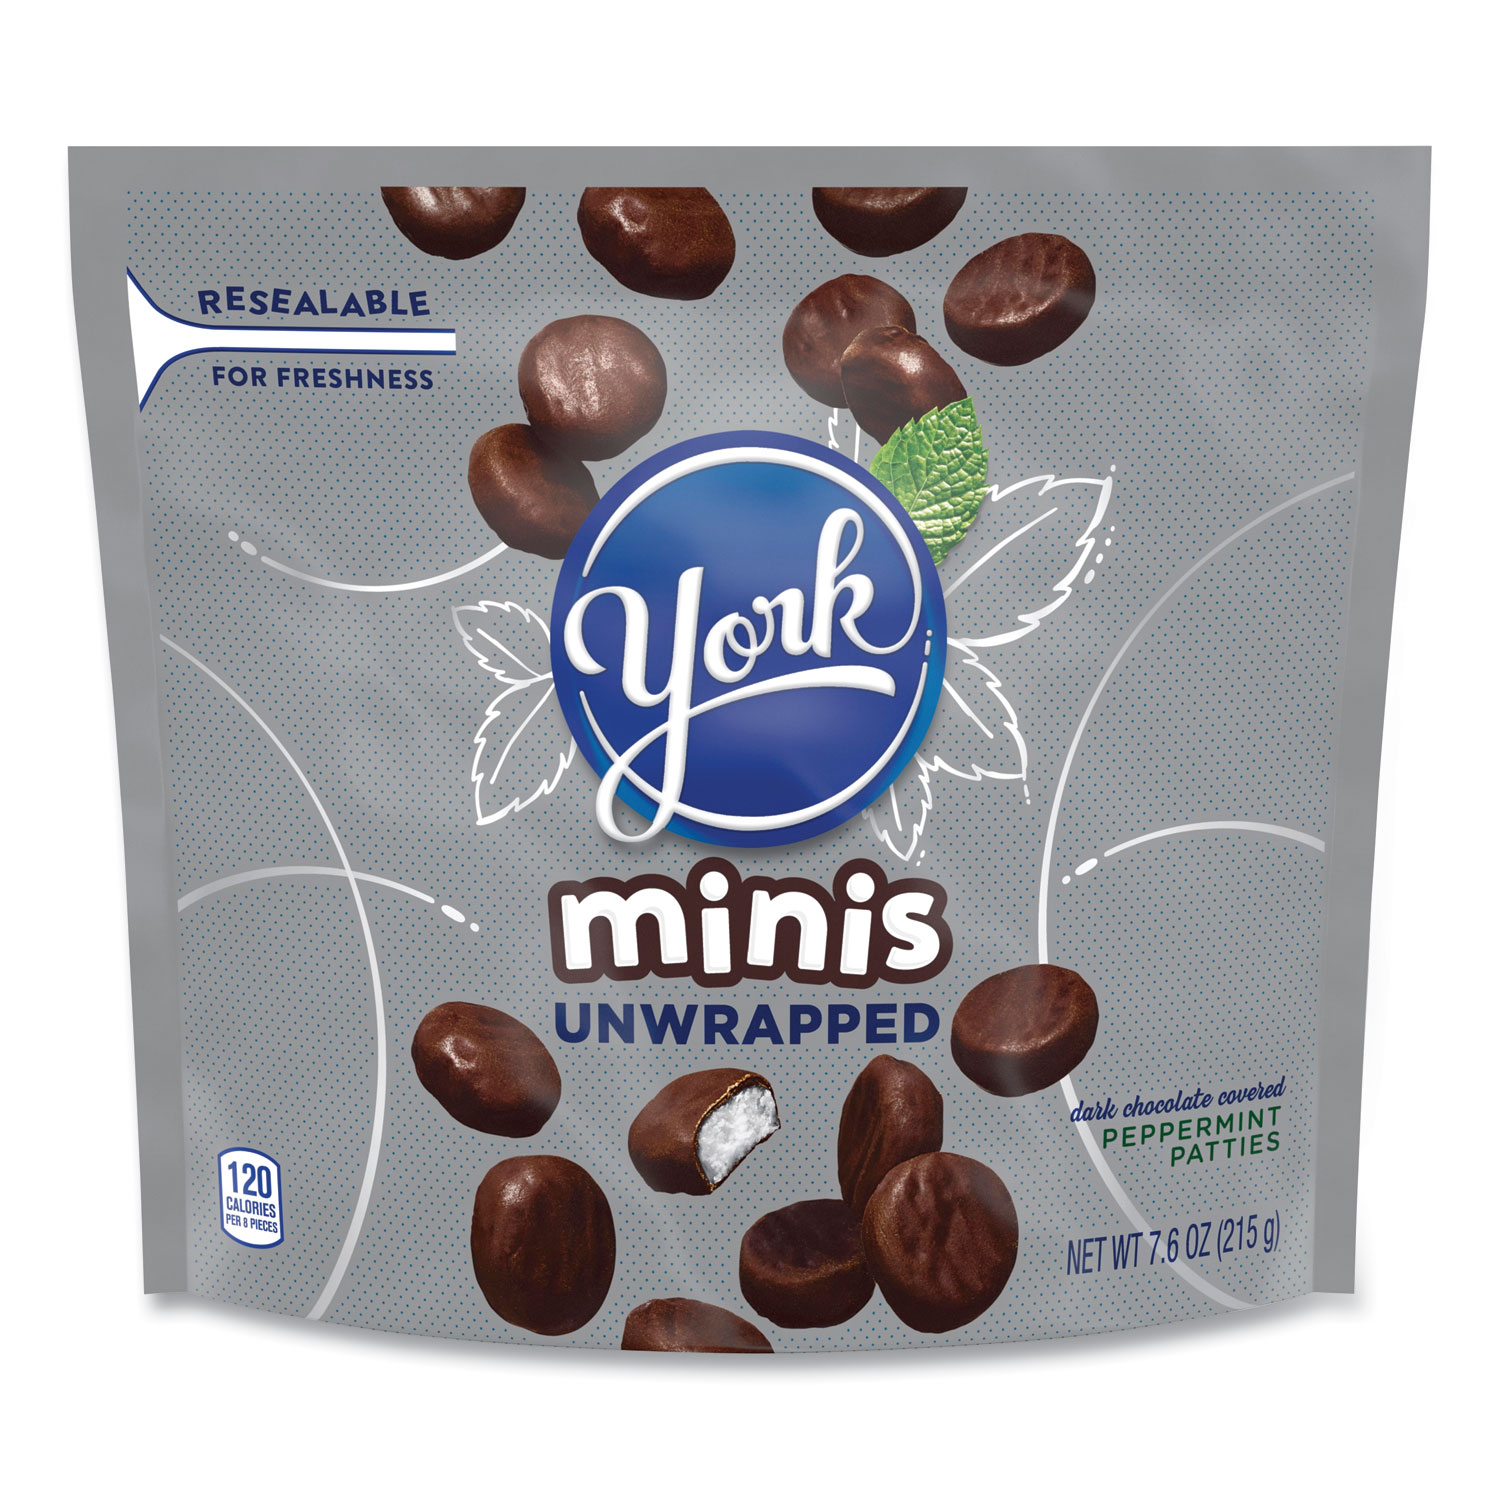  York 47224 Unwrapped Minis Dark Chocolate Peppermint Patties, 7.6 oz Bag, 4 Bags/Pack, Free Delivery in 1-4 Business Days (GRR24600407) 